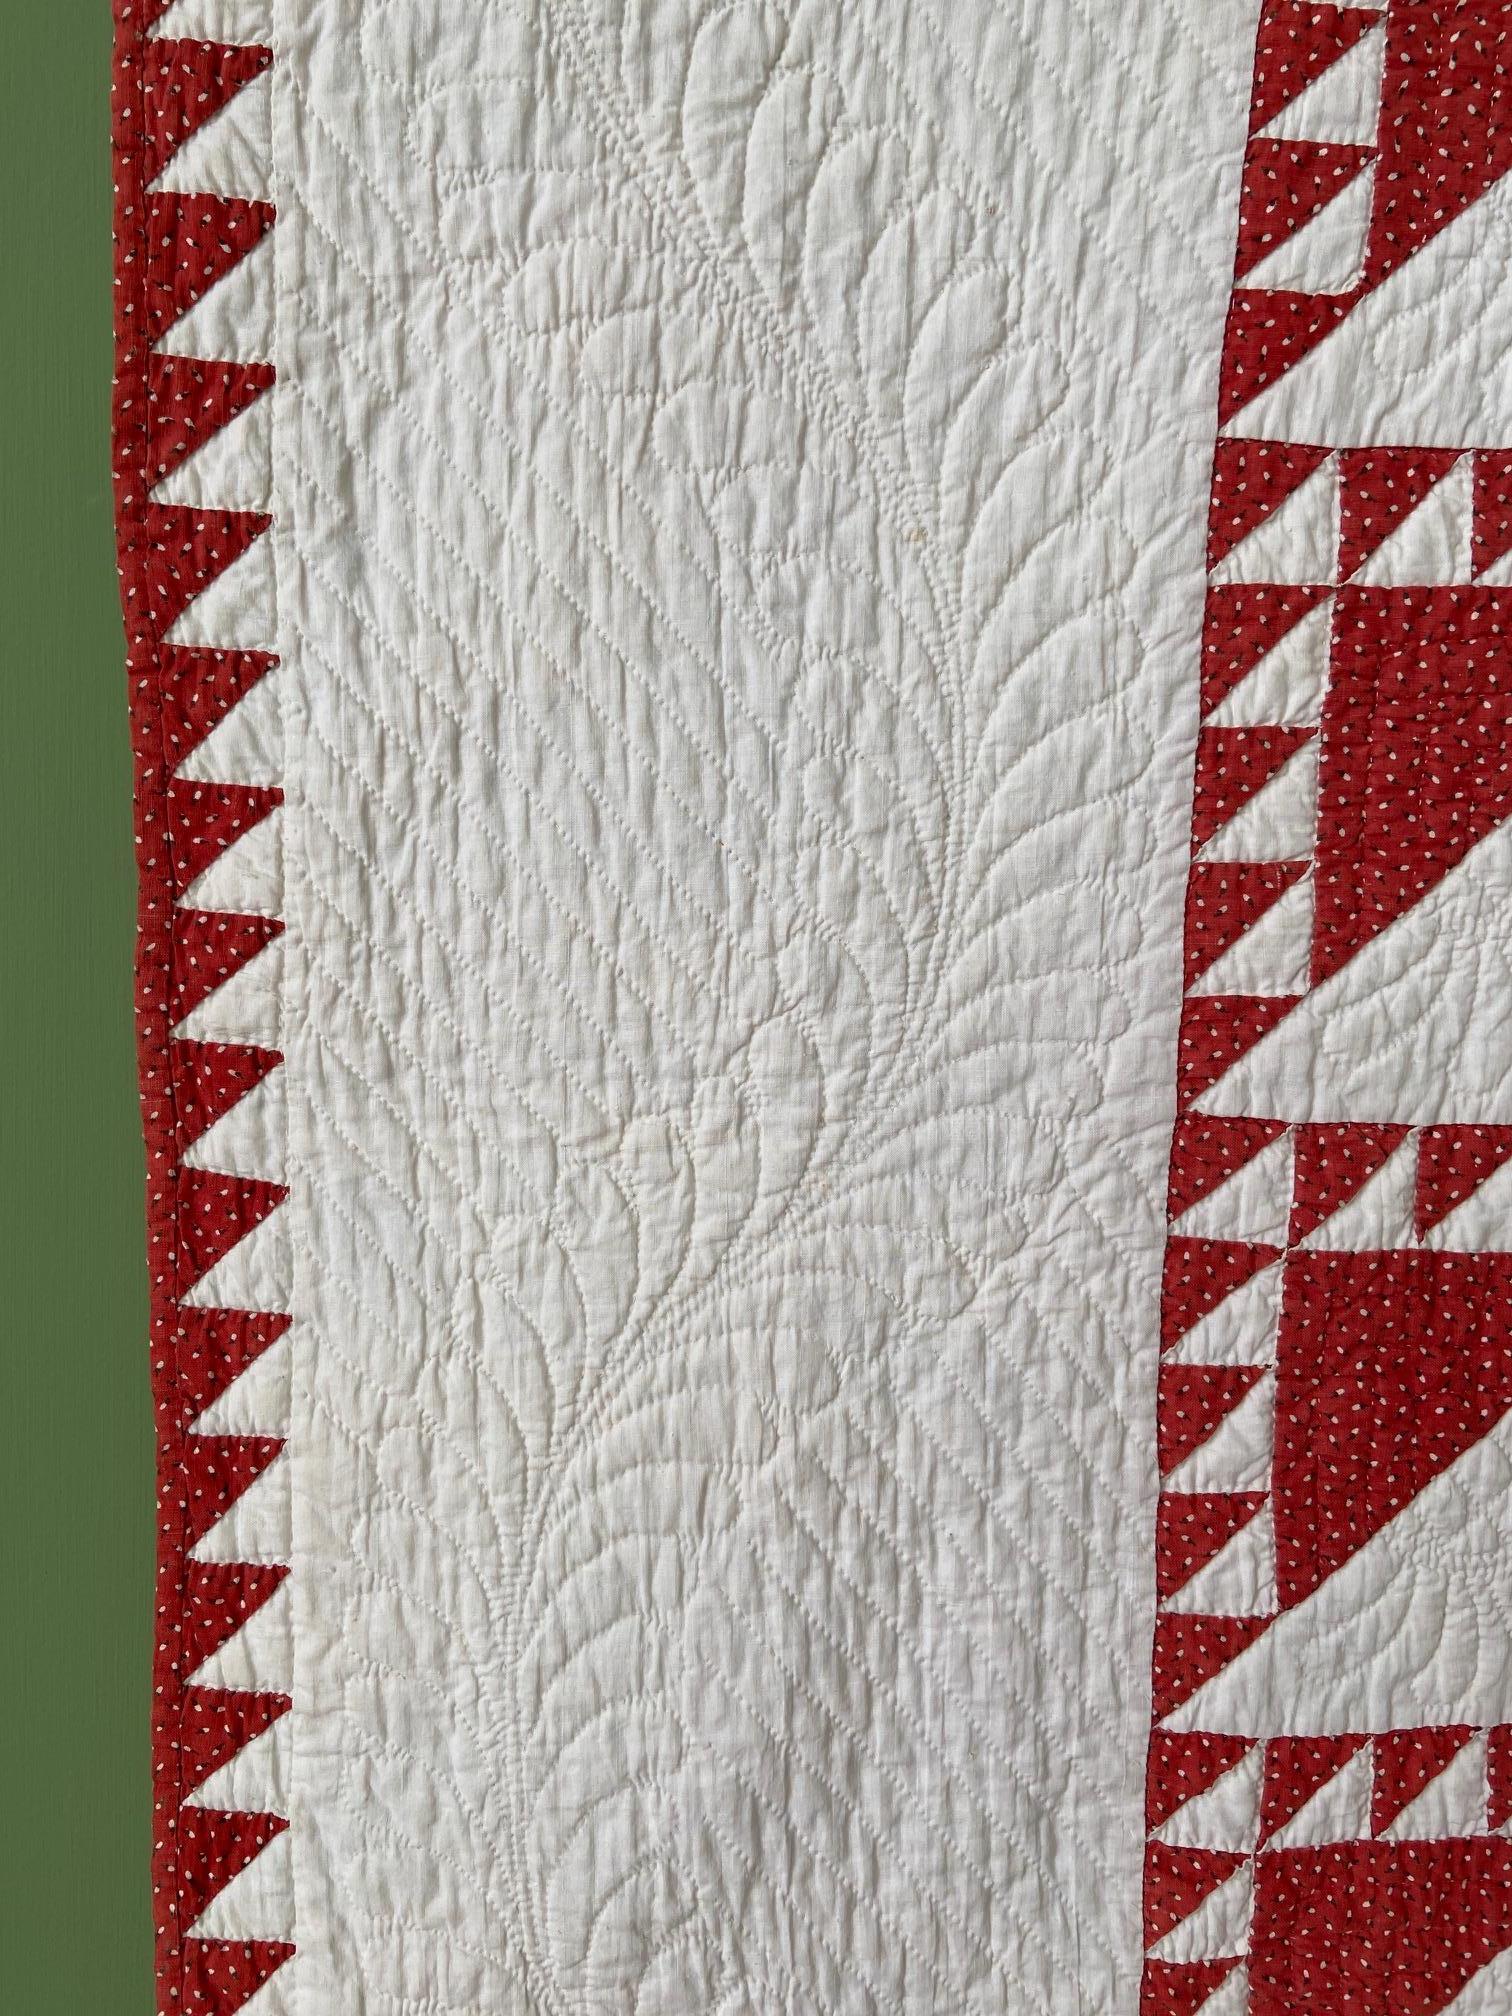 American Antique Cotton White and Red 